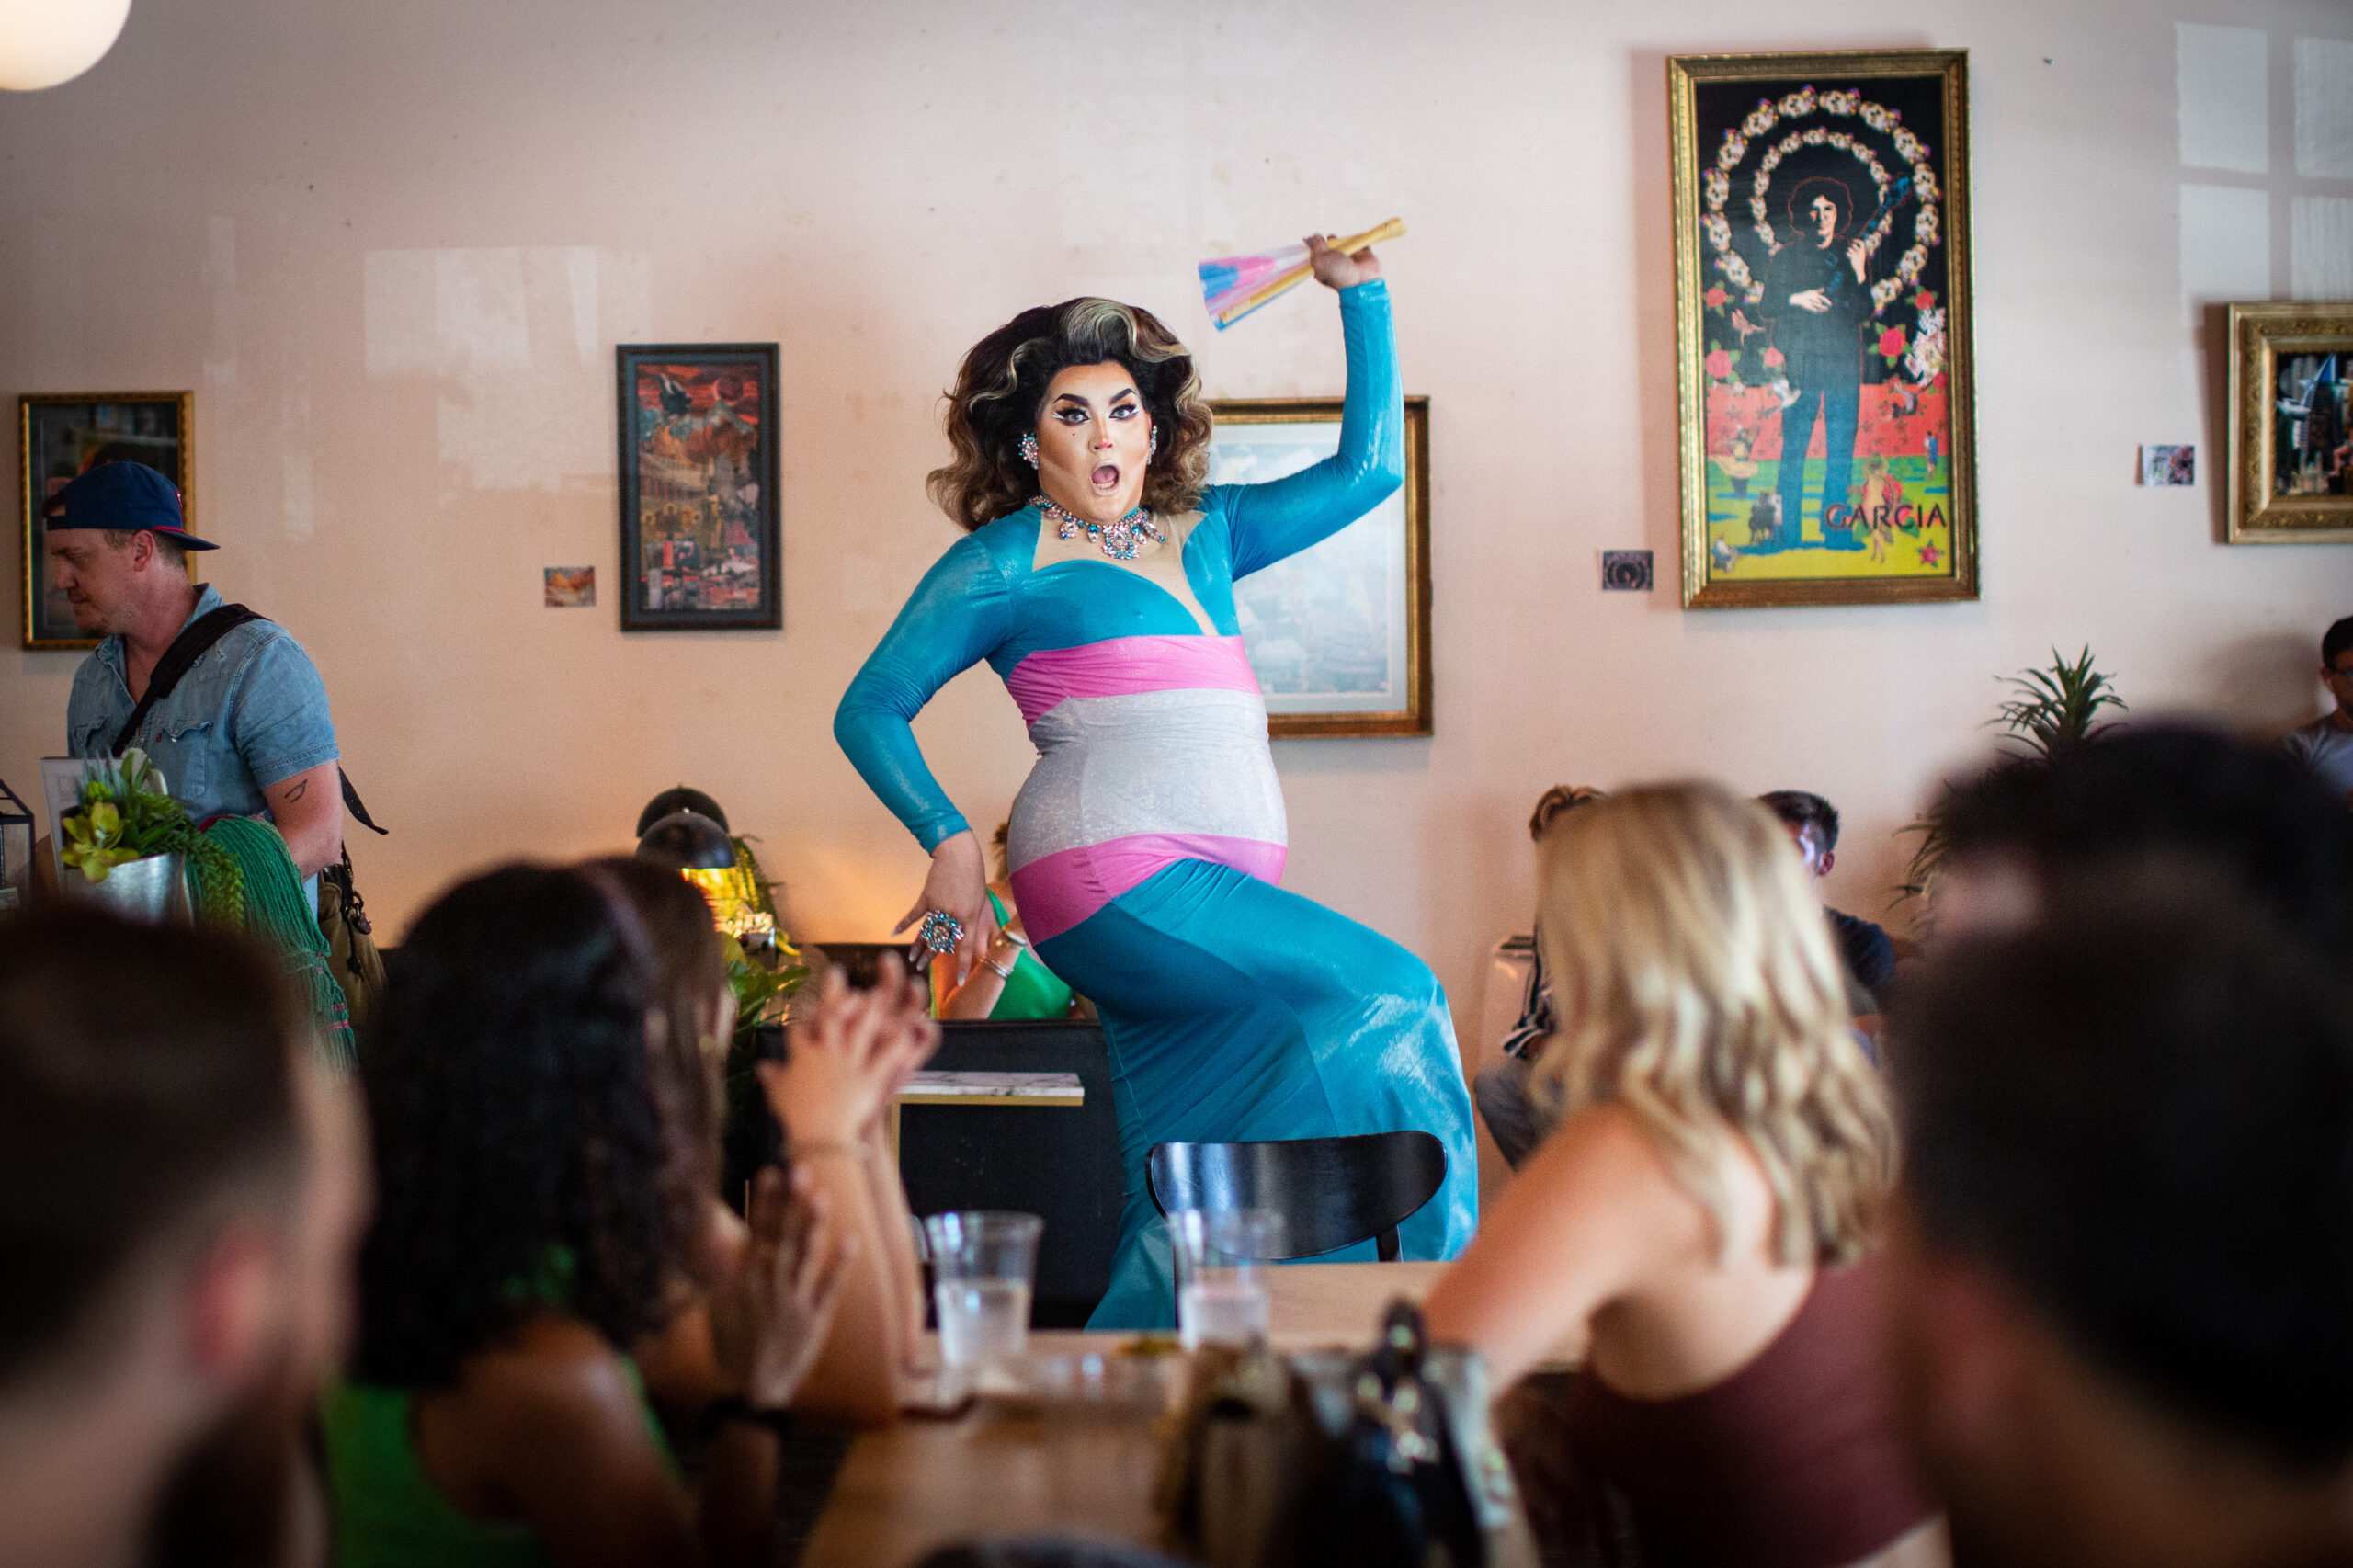 Texas law restricting drag performances ruled unconstitutional by federal judge Texas Standard image